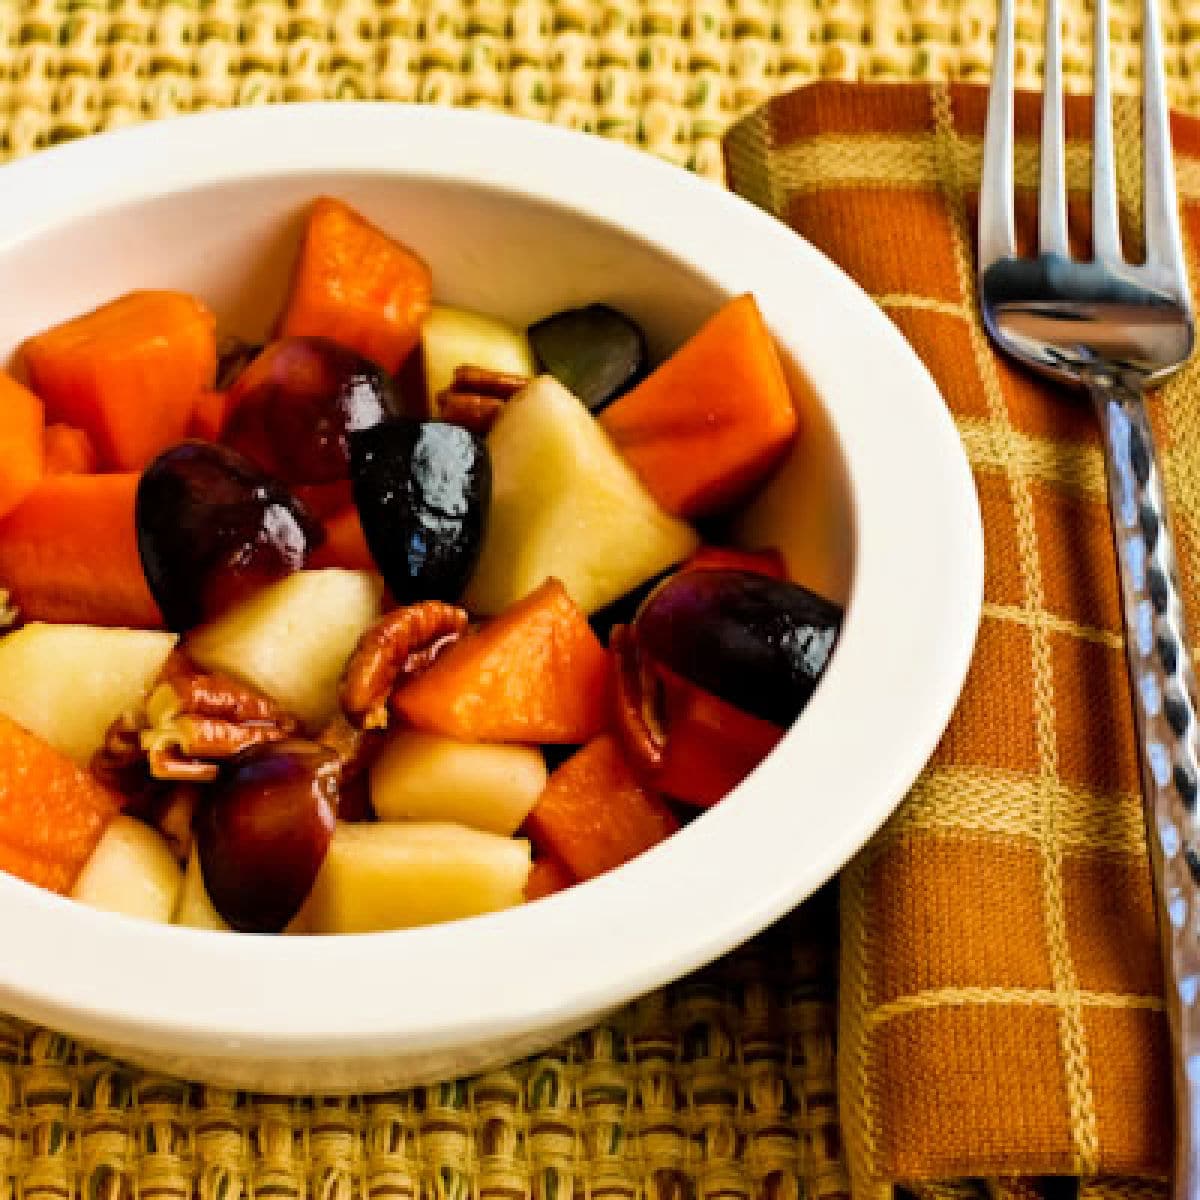 Square image for Persimmon Salad shown with fork and napkin.